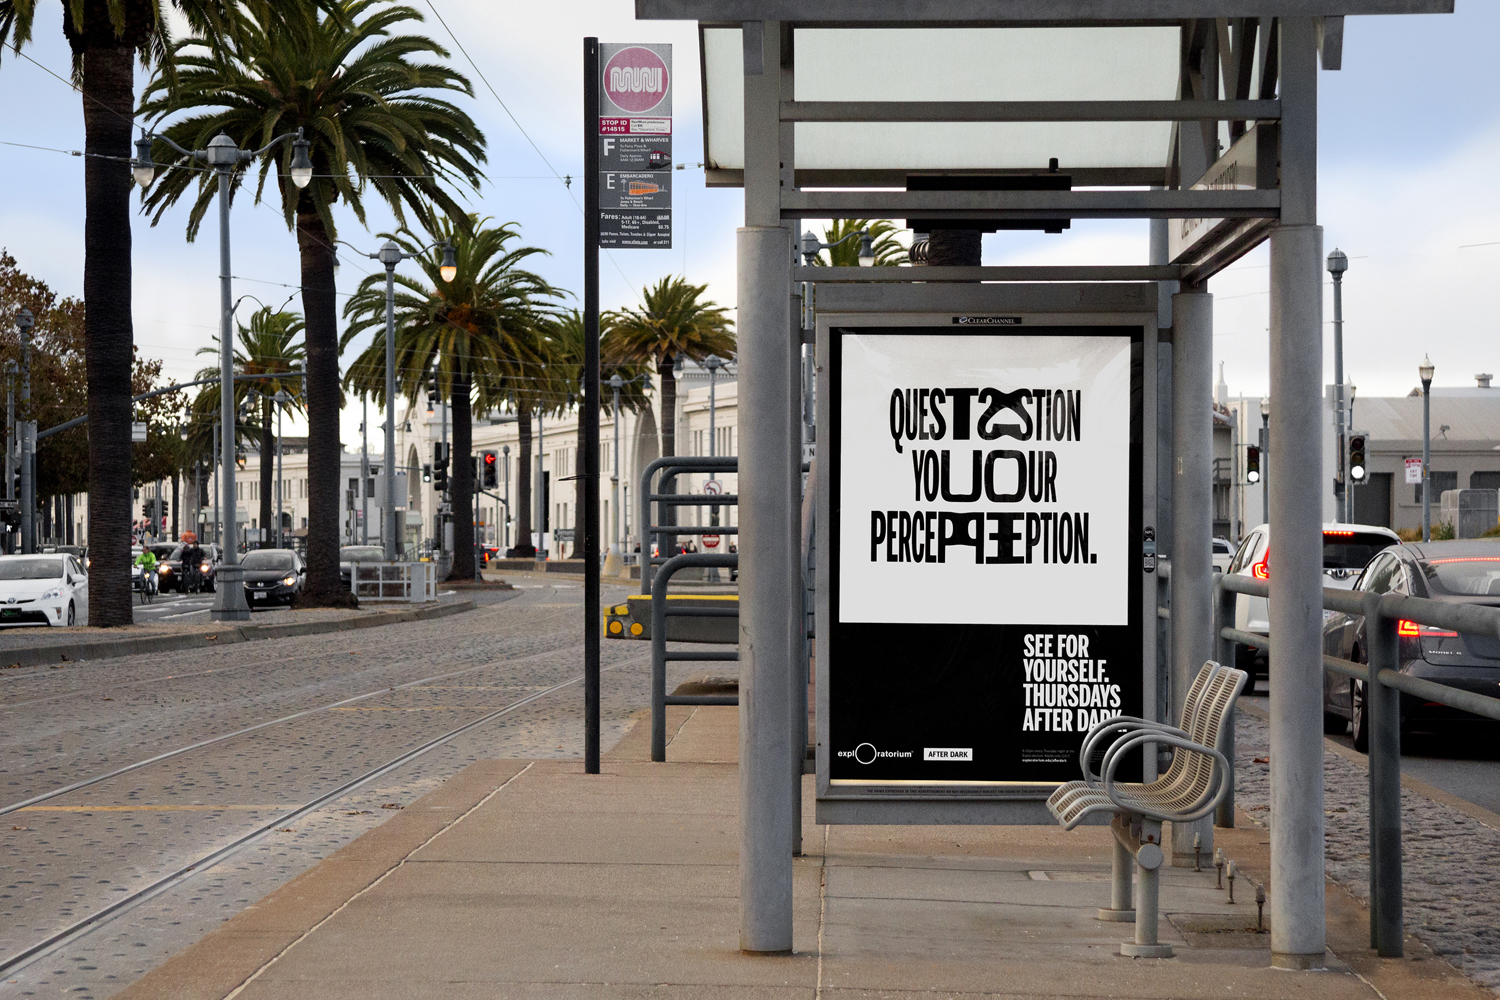 Visual identity and campaign poster by Collins for Exploratorium's After Dark, a weekly adults-only museum experience of perception